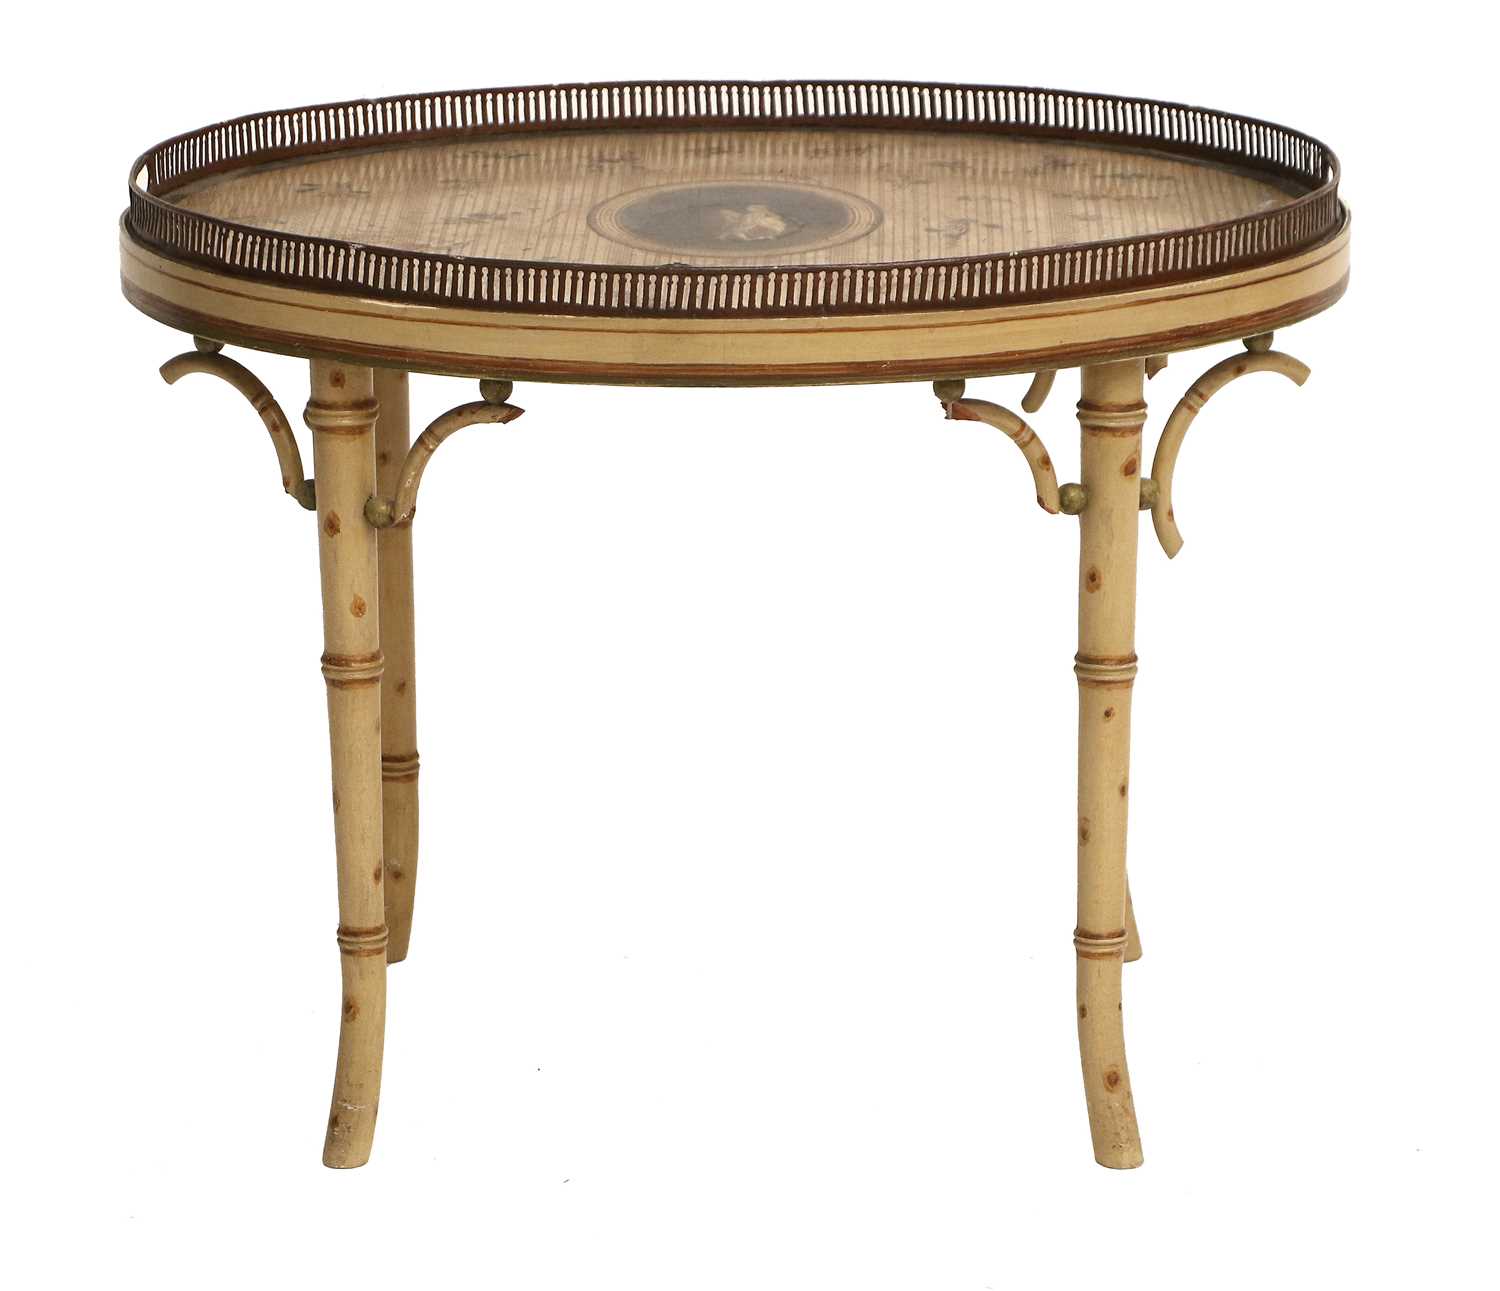 A Regency-Style Cream-Painted Oval Side Table, the toleware tray top with a pierced gallery, the